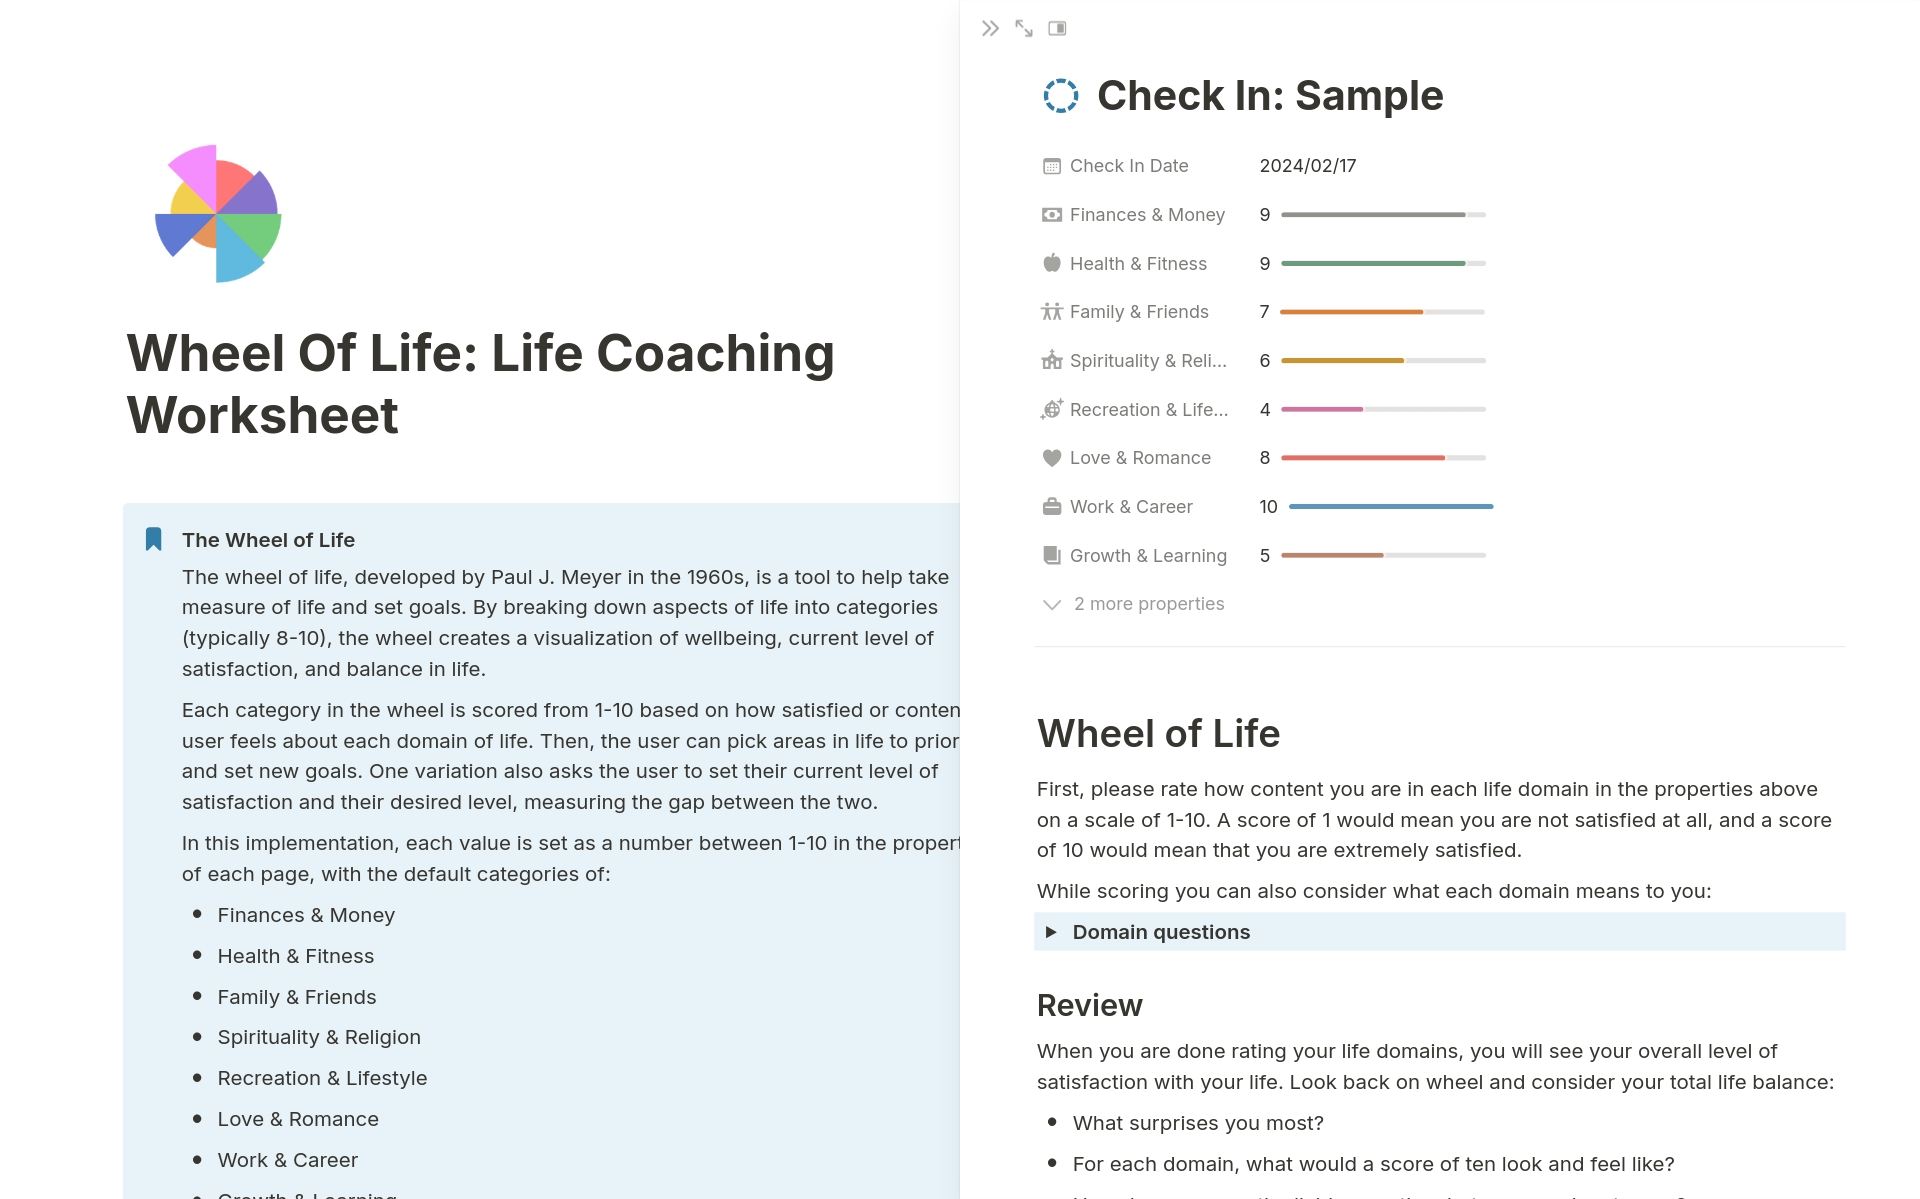 Learn about and use the wheel of life, a tool for assessing life balance and satisfaction!